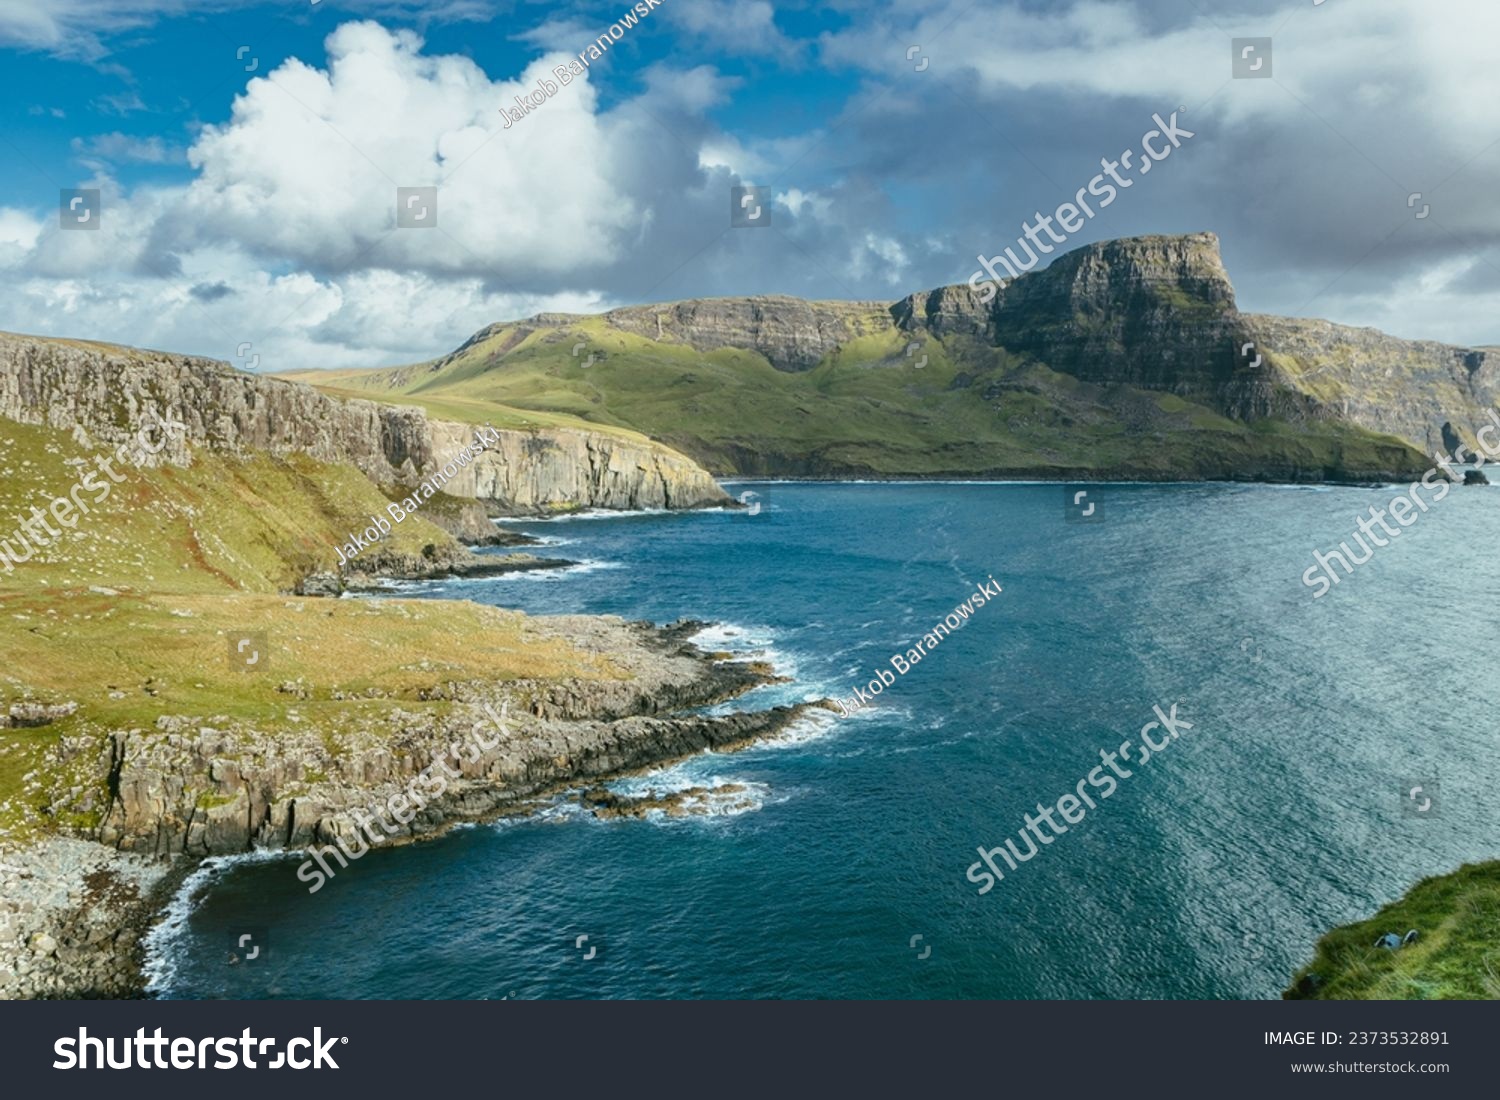 Isle of Skye is the largest island in the Inner Hebrides. It lies just off the west coast of mainland Scotland in the Atlantic Ocean.
Beautiful solitude in a quiet atmosphere without people. #2373532891